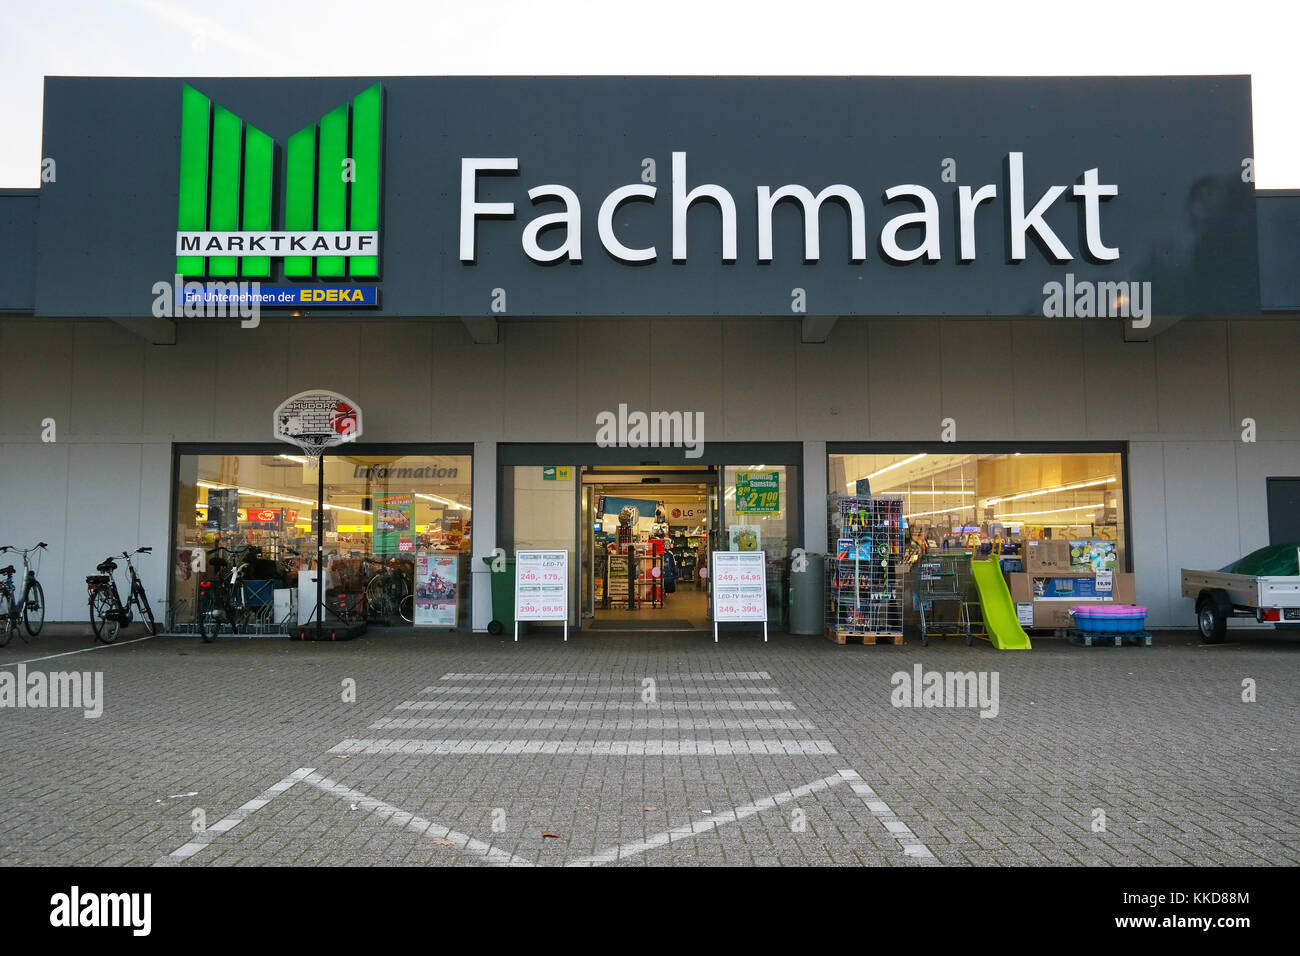 Marktkauf High Resolution Stock Photography and Images - Alamy